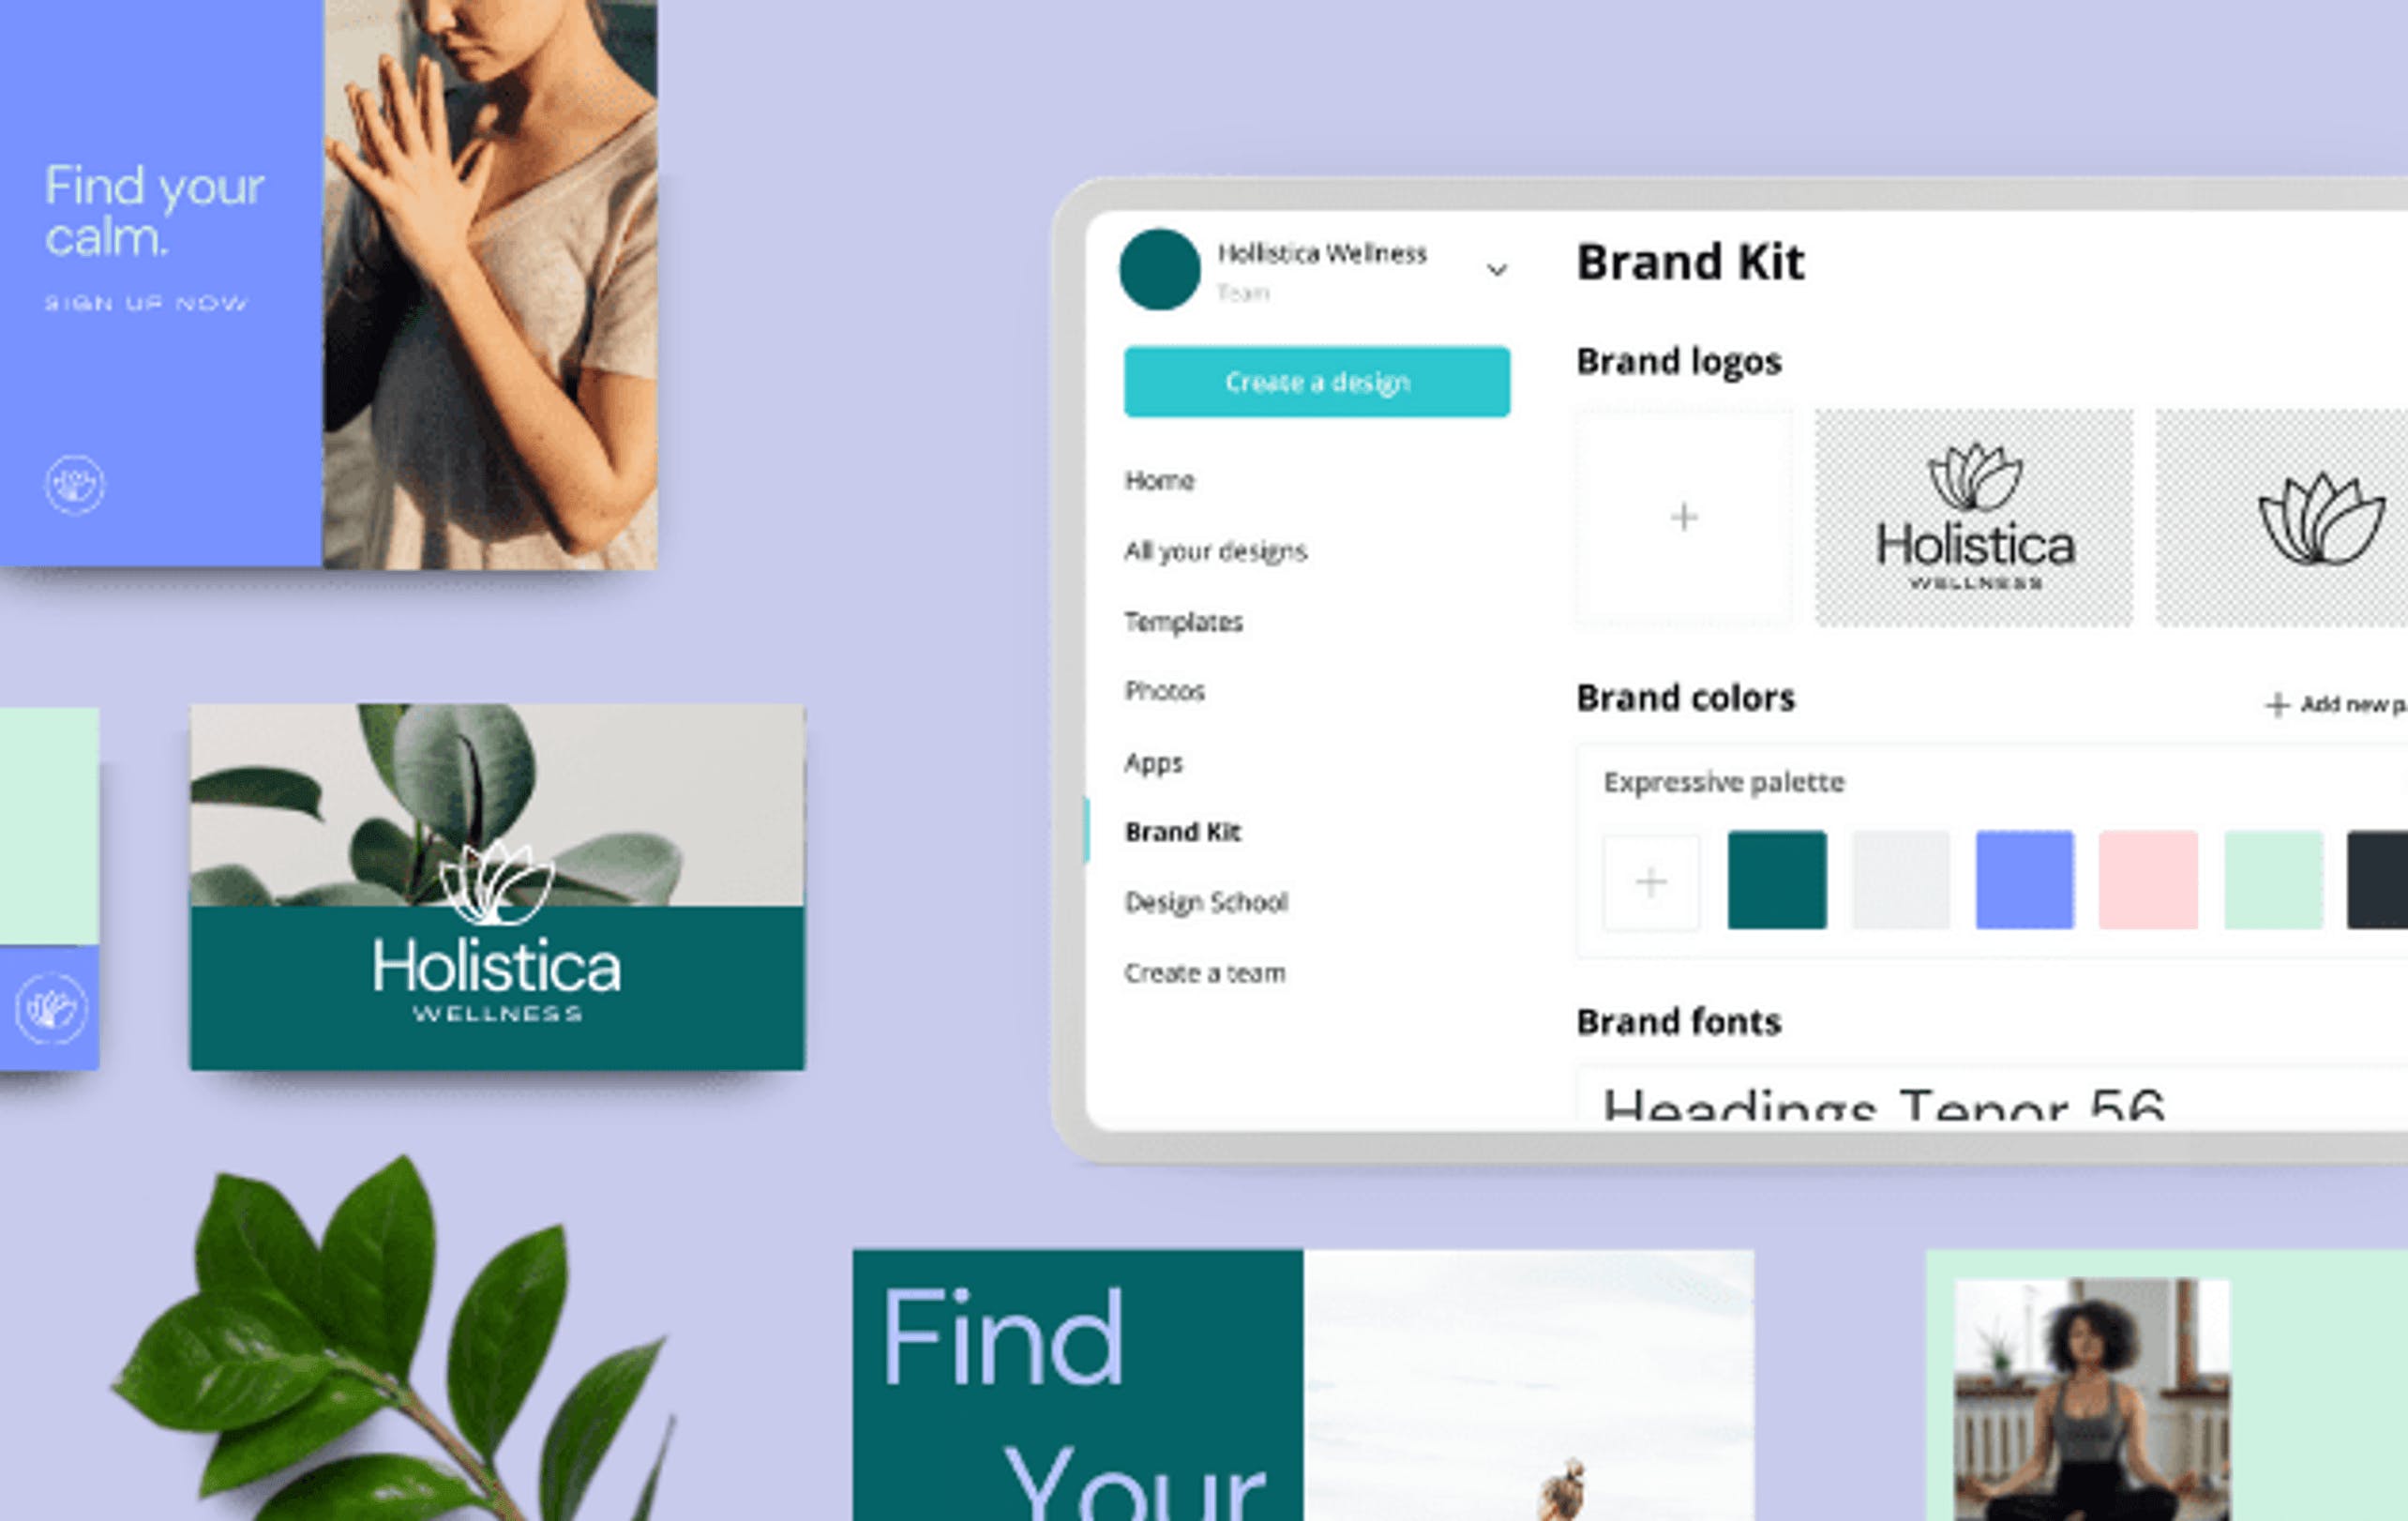 Brand Kit is limited in Canva's free version